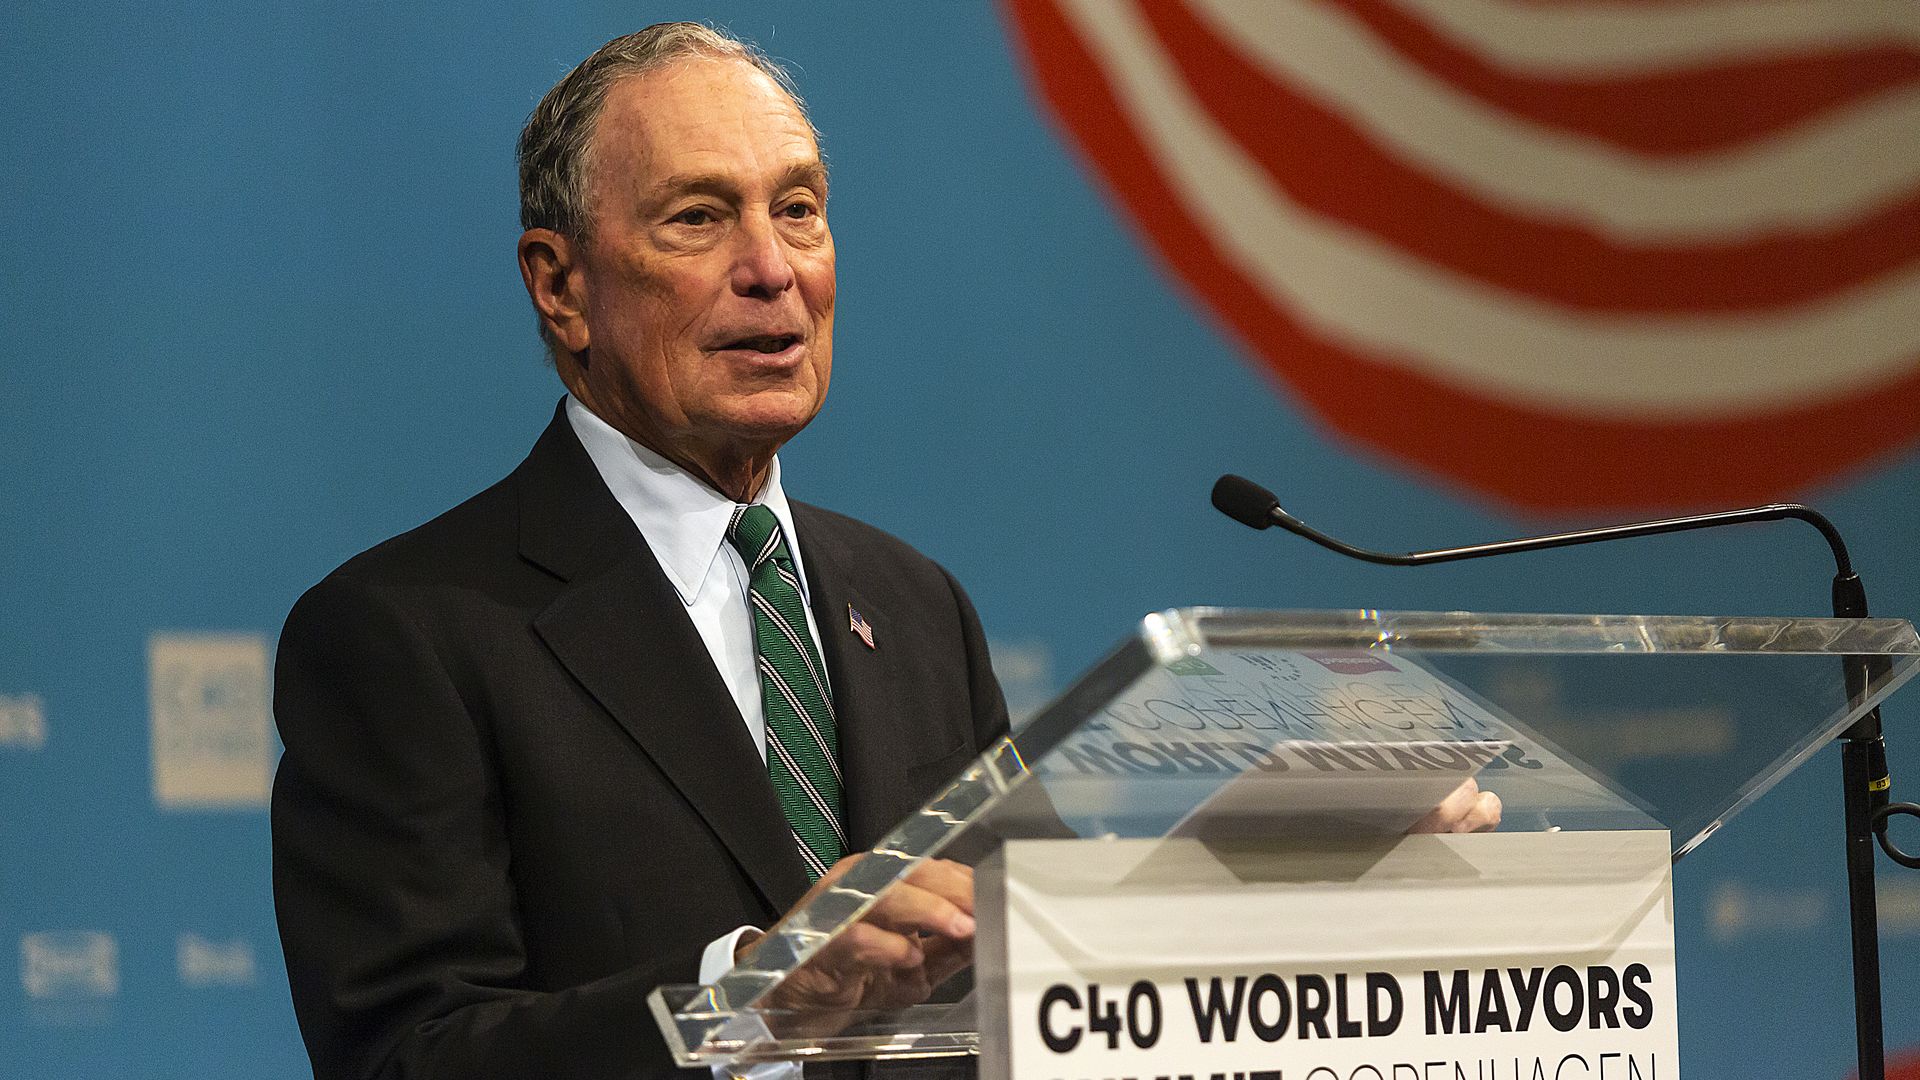 Bloomberg speaks at a press conference at the C40 World Mayors Summit